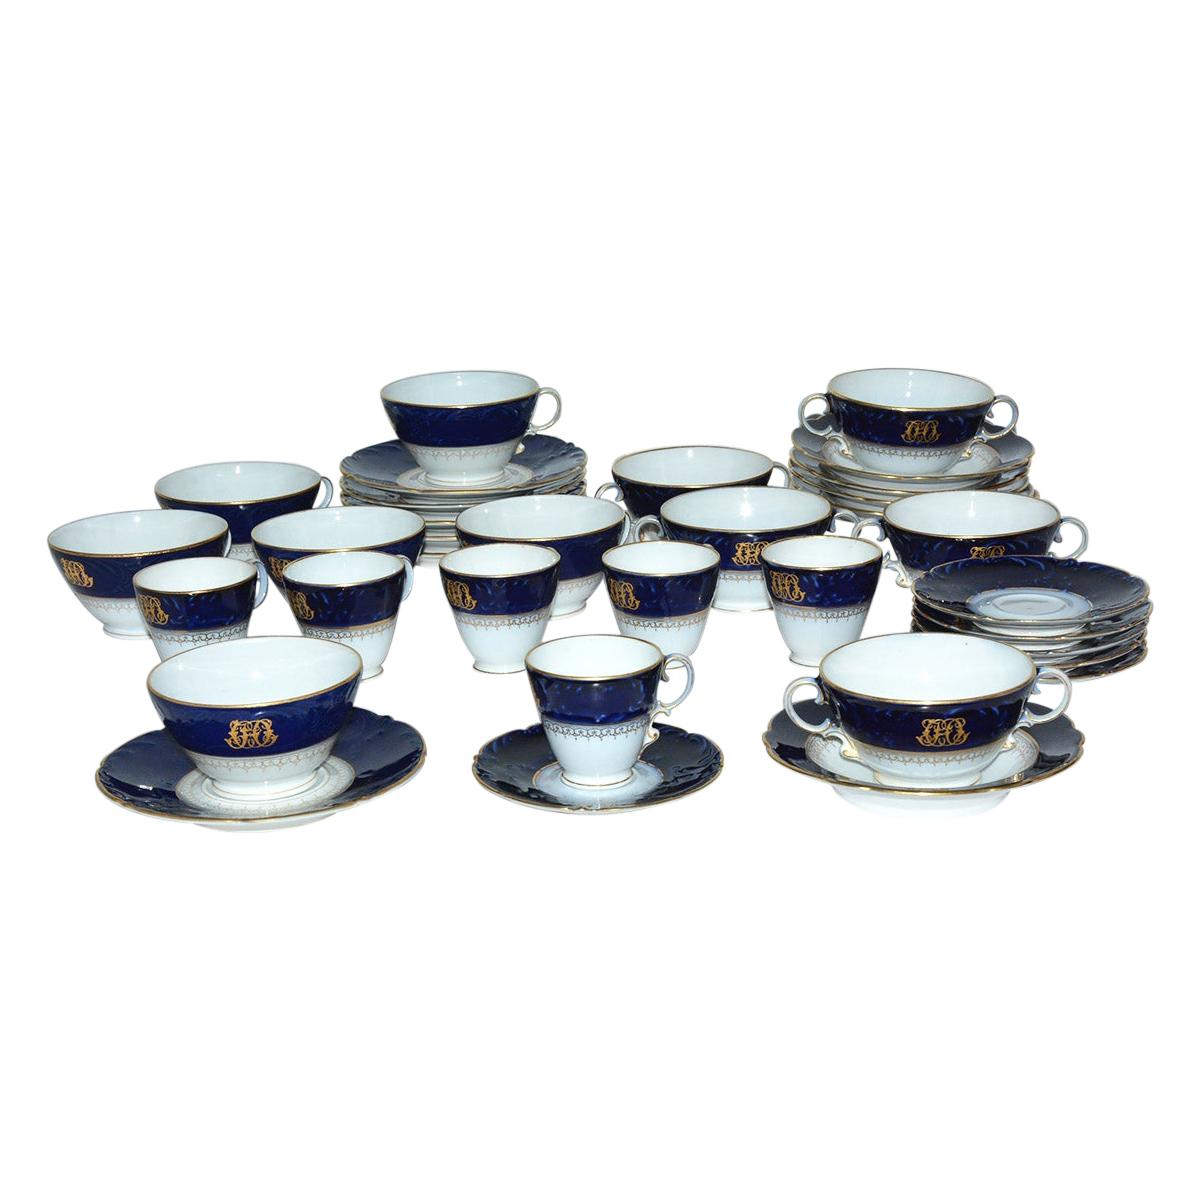 Set of Mid-19th Century Cobalt Blue and White Porcelain, China For Sale